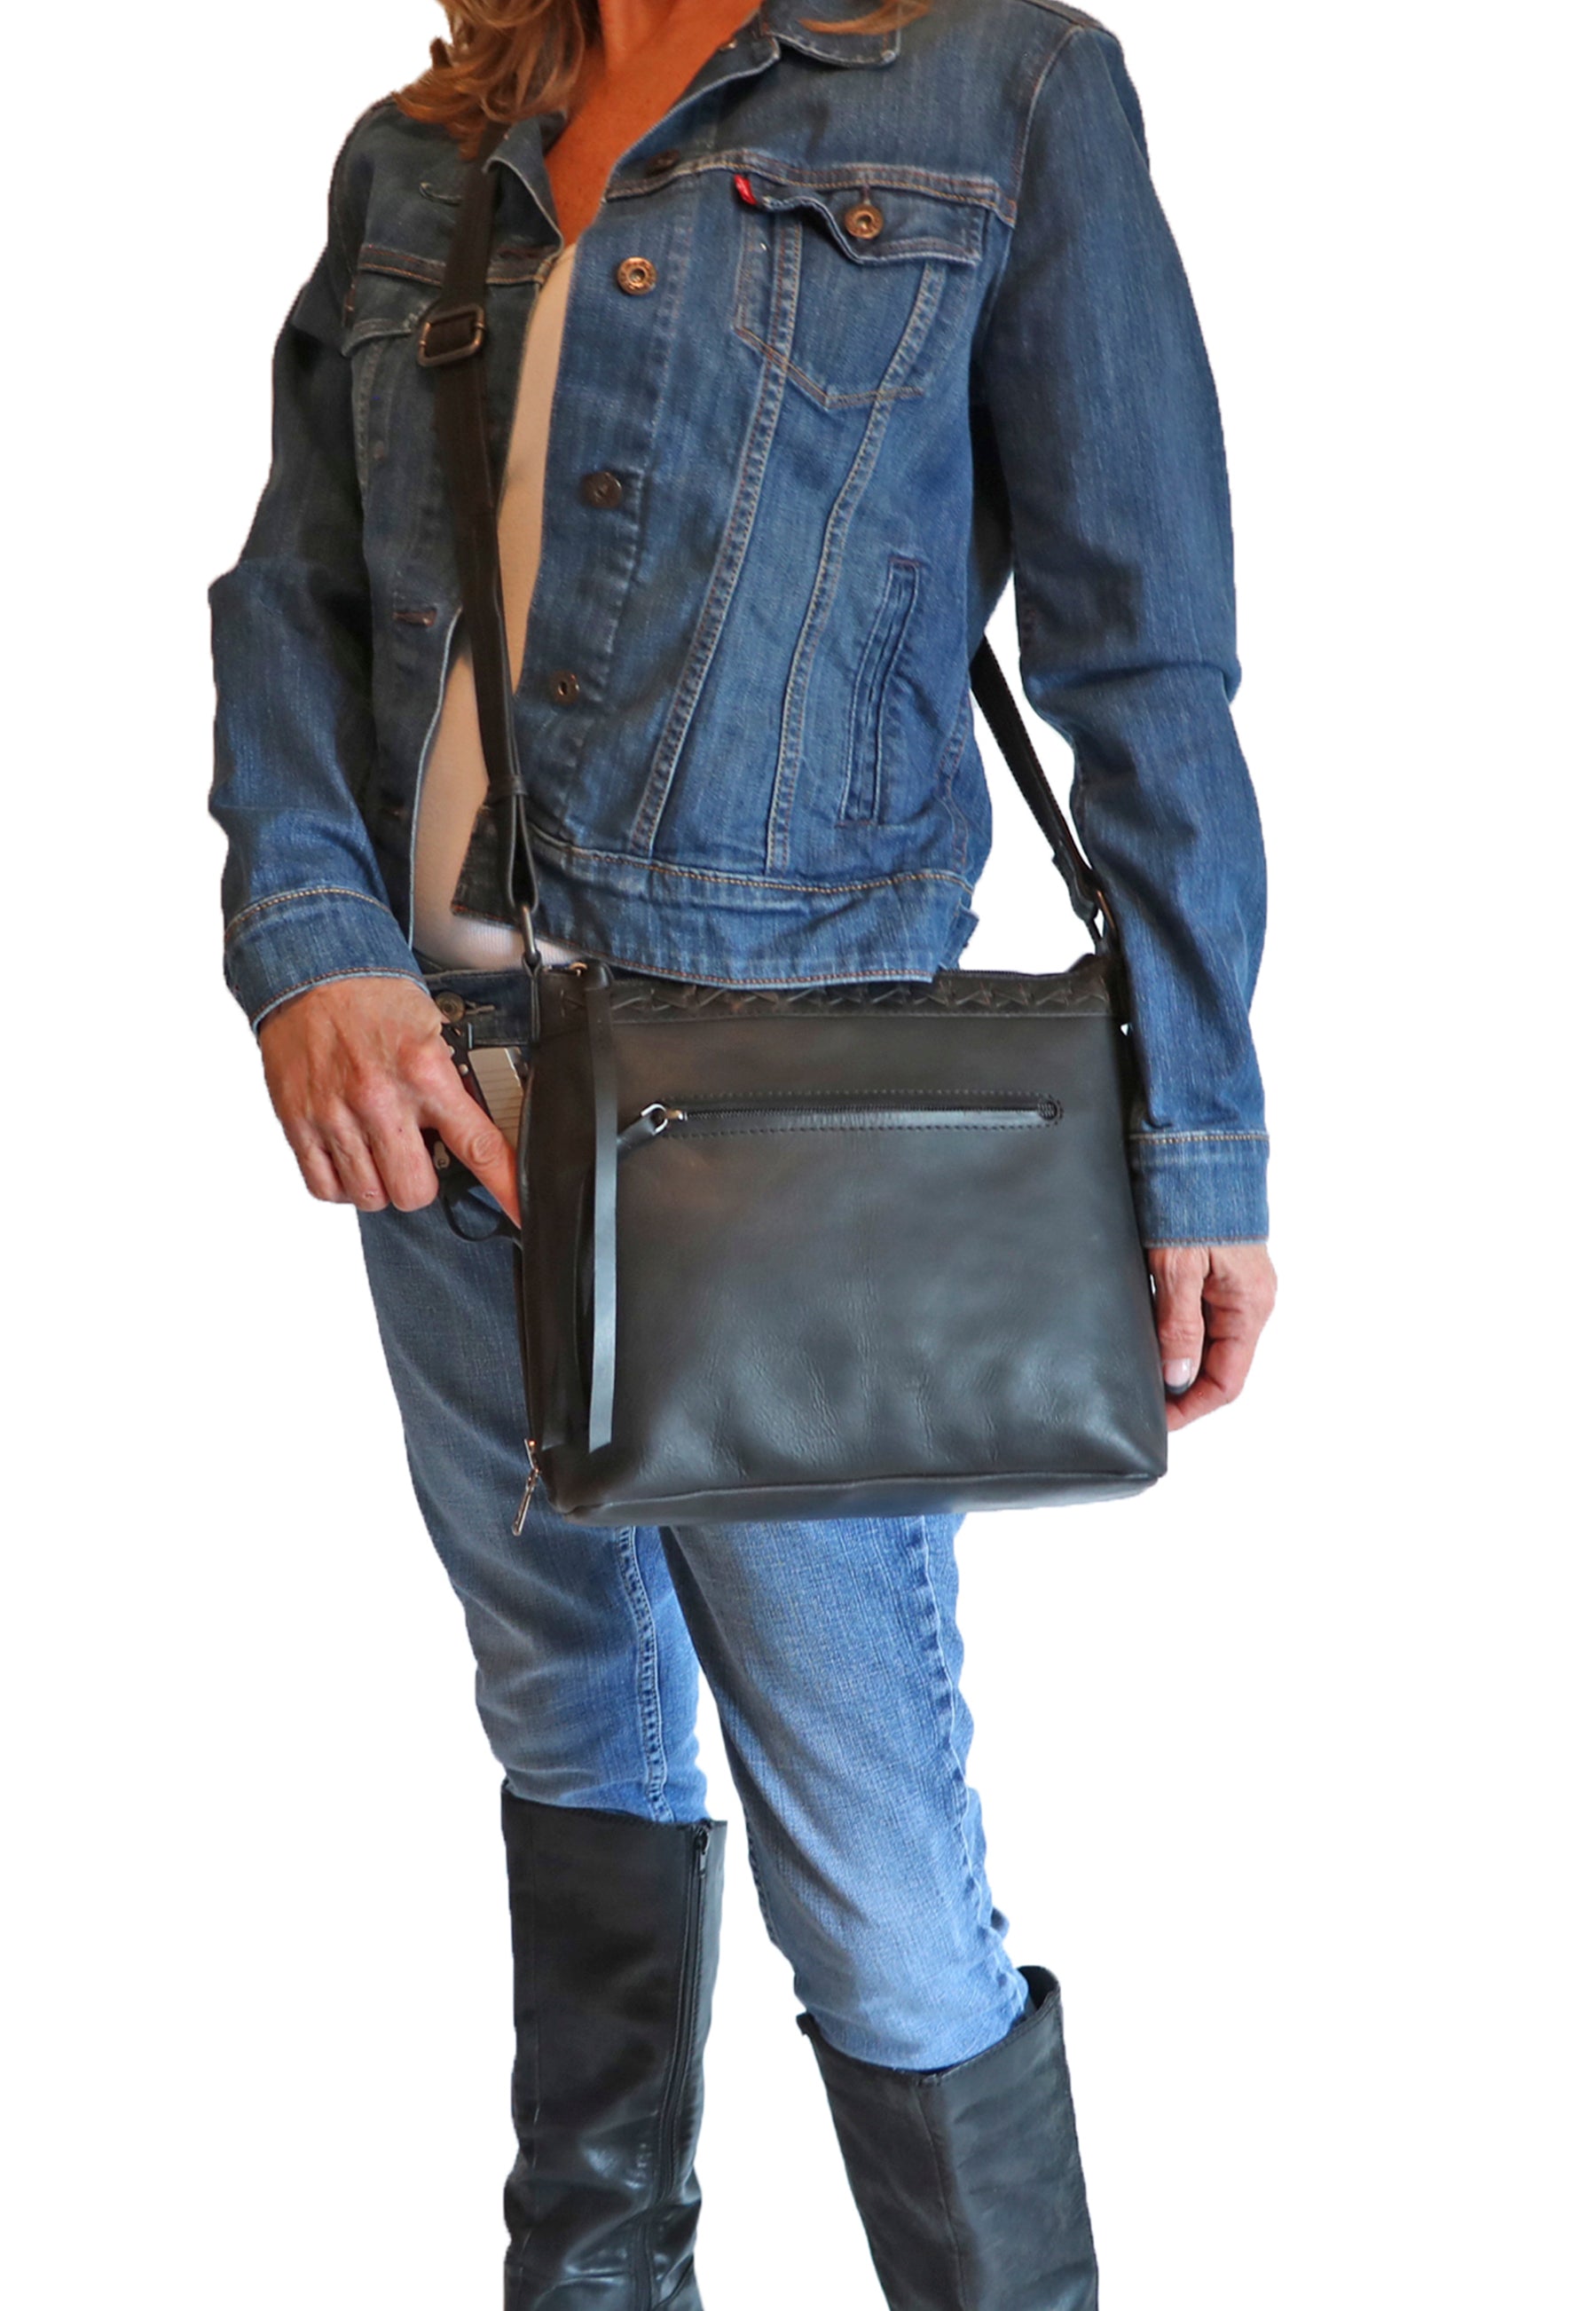 Model demonstrating leather crossbody conceal carry bag with pistol